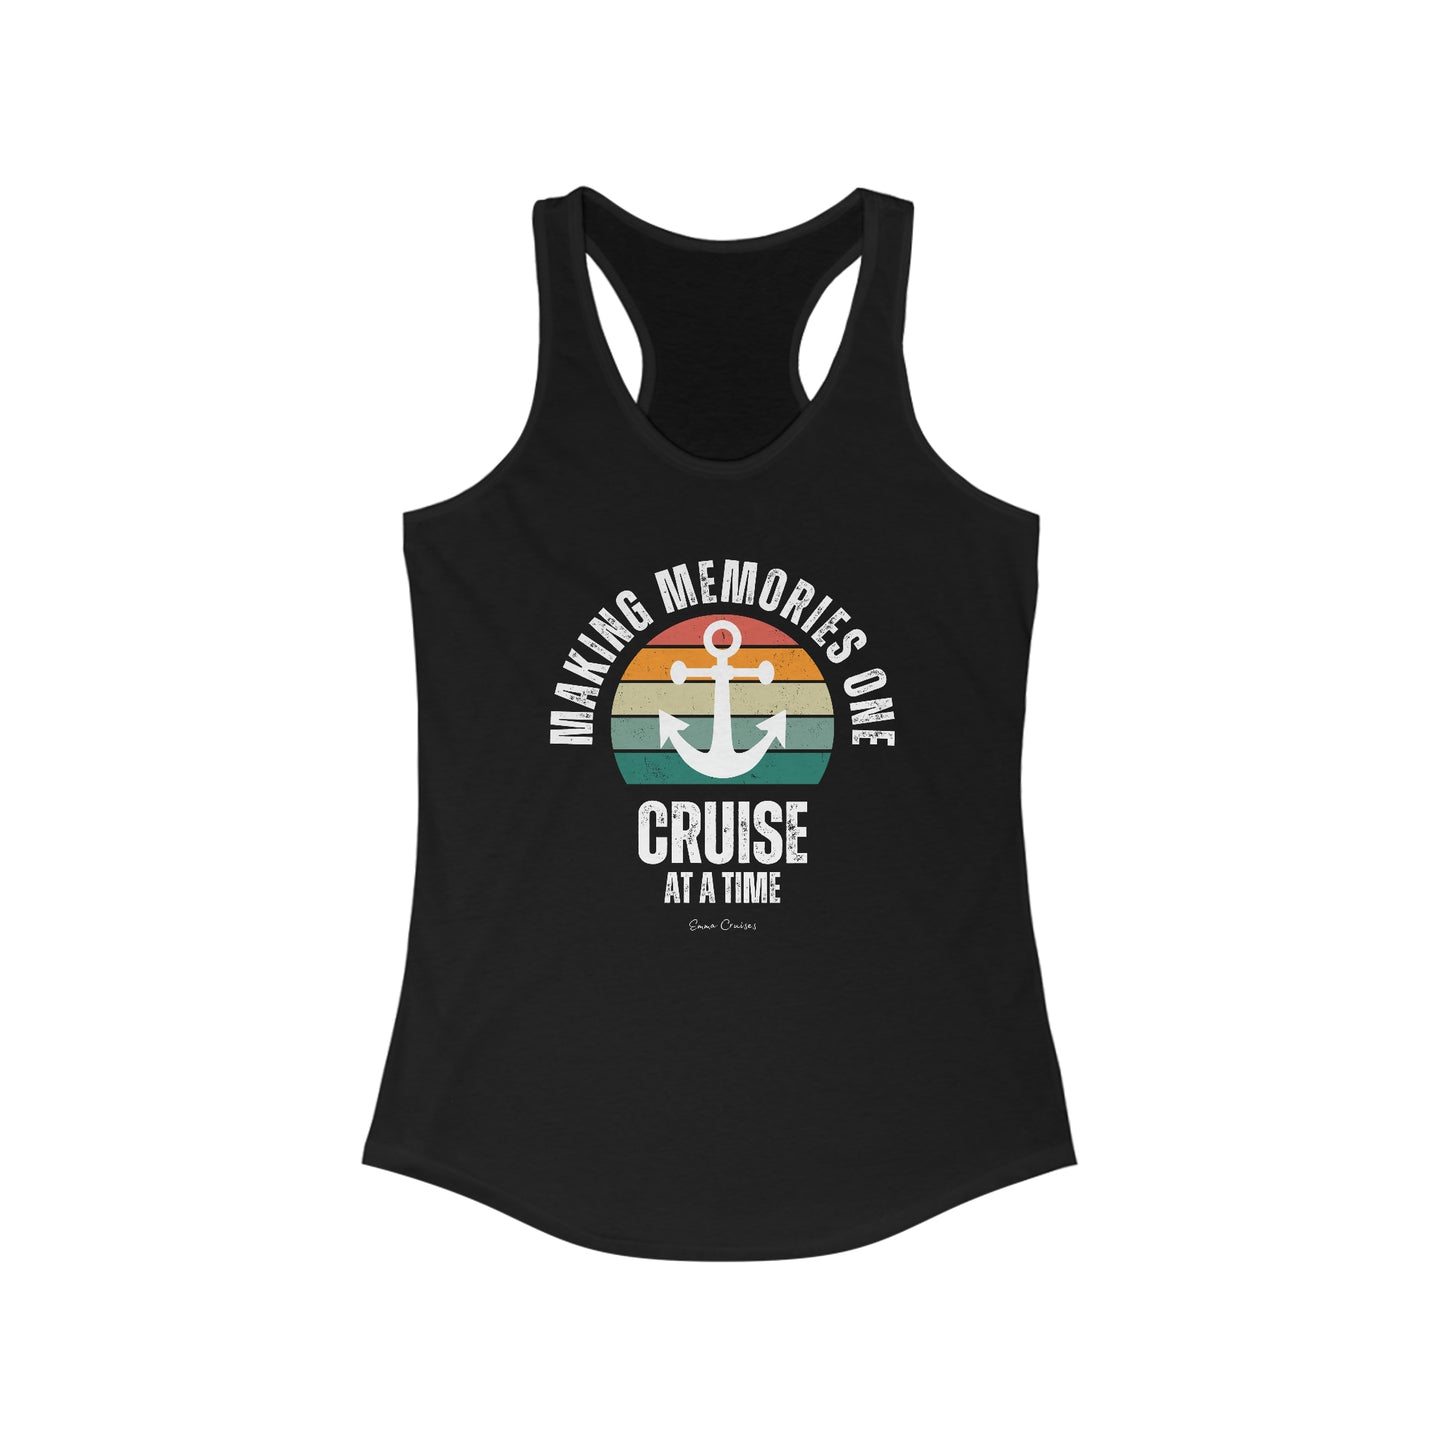 Making Memories One Cruise at a Time - Tank Top